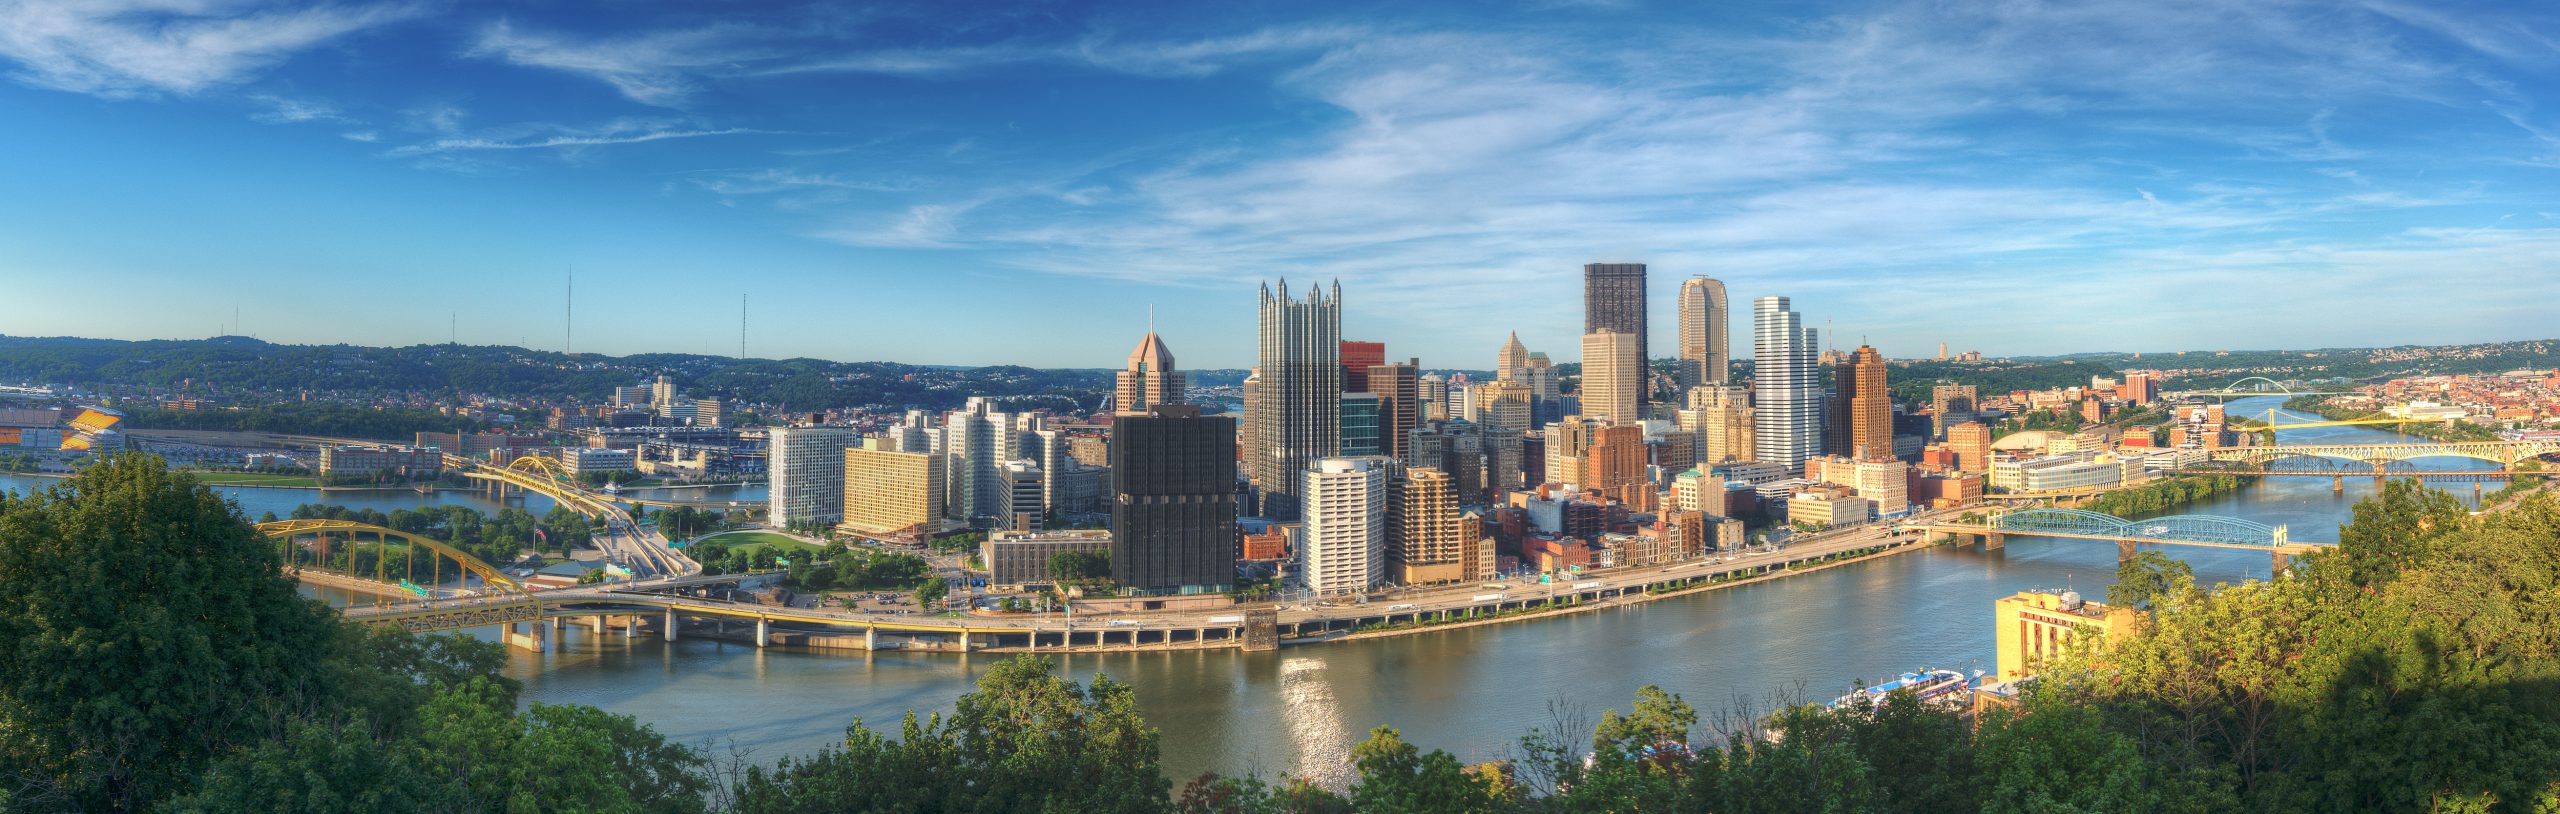 Panorama of downtown Pittsburgh, Pennsylvania, USA at Allegheny River. MM Romance, Gay Romance, Author SIgning